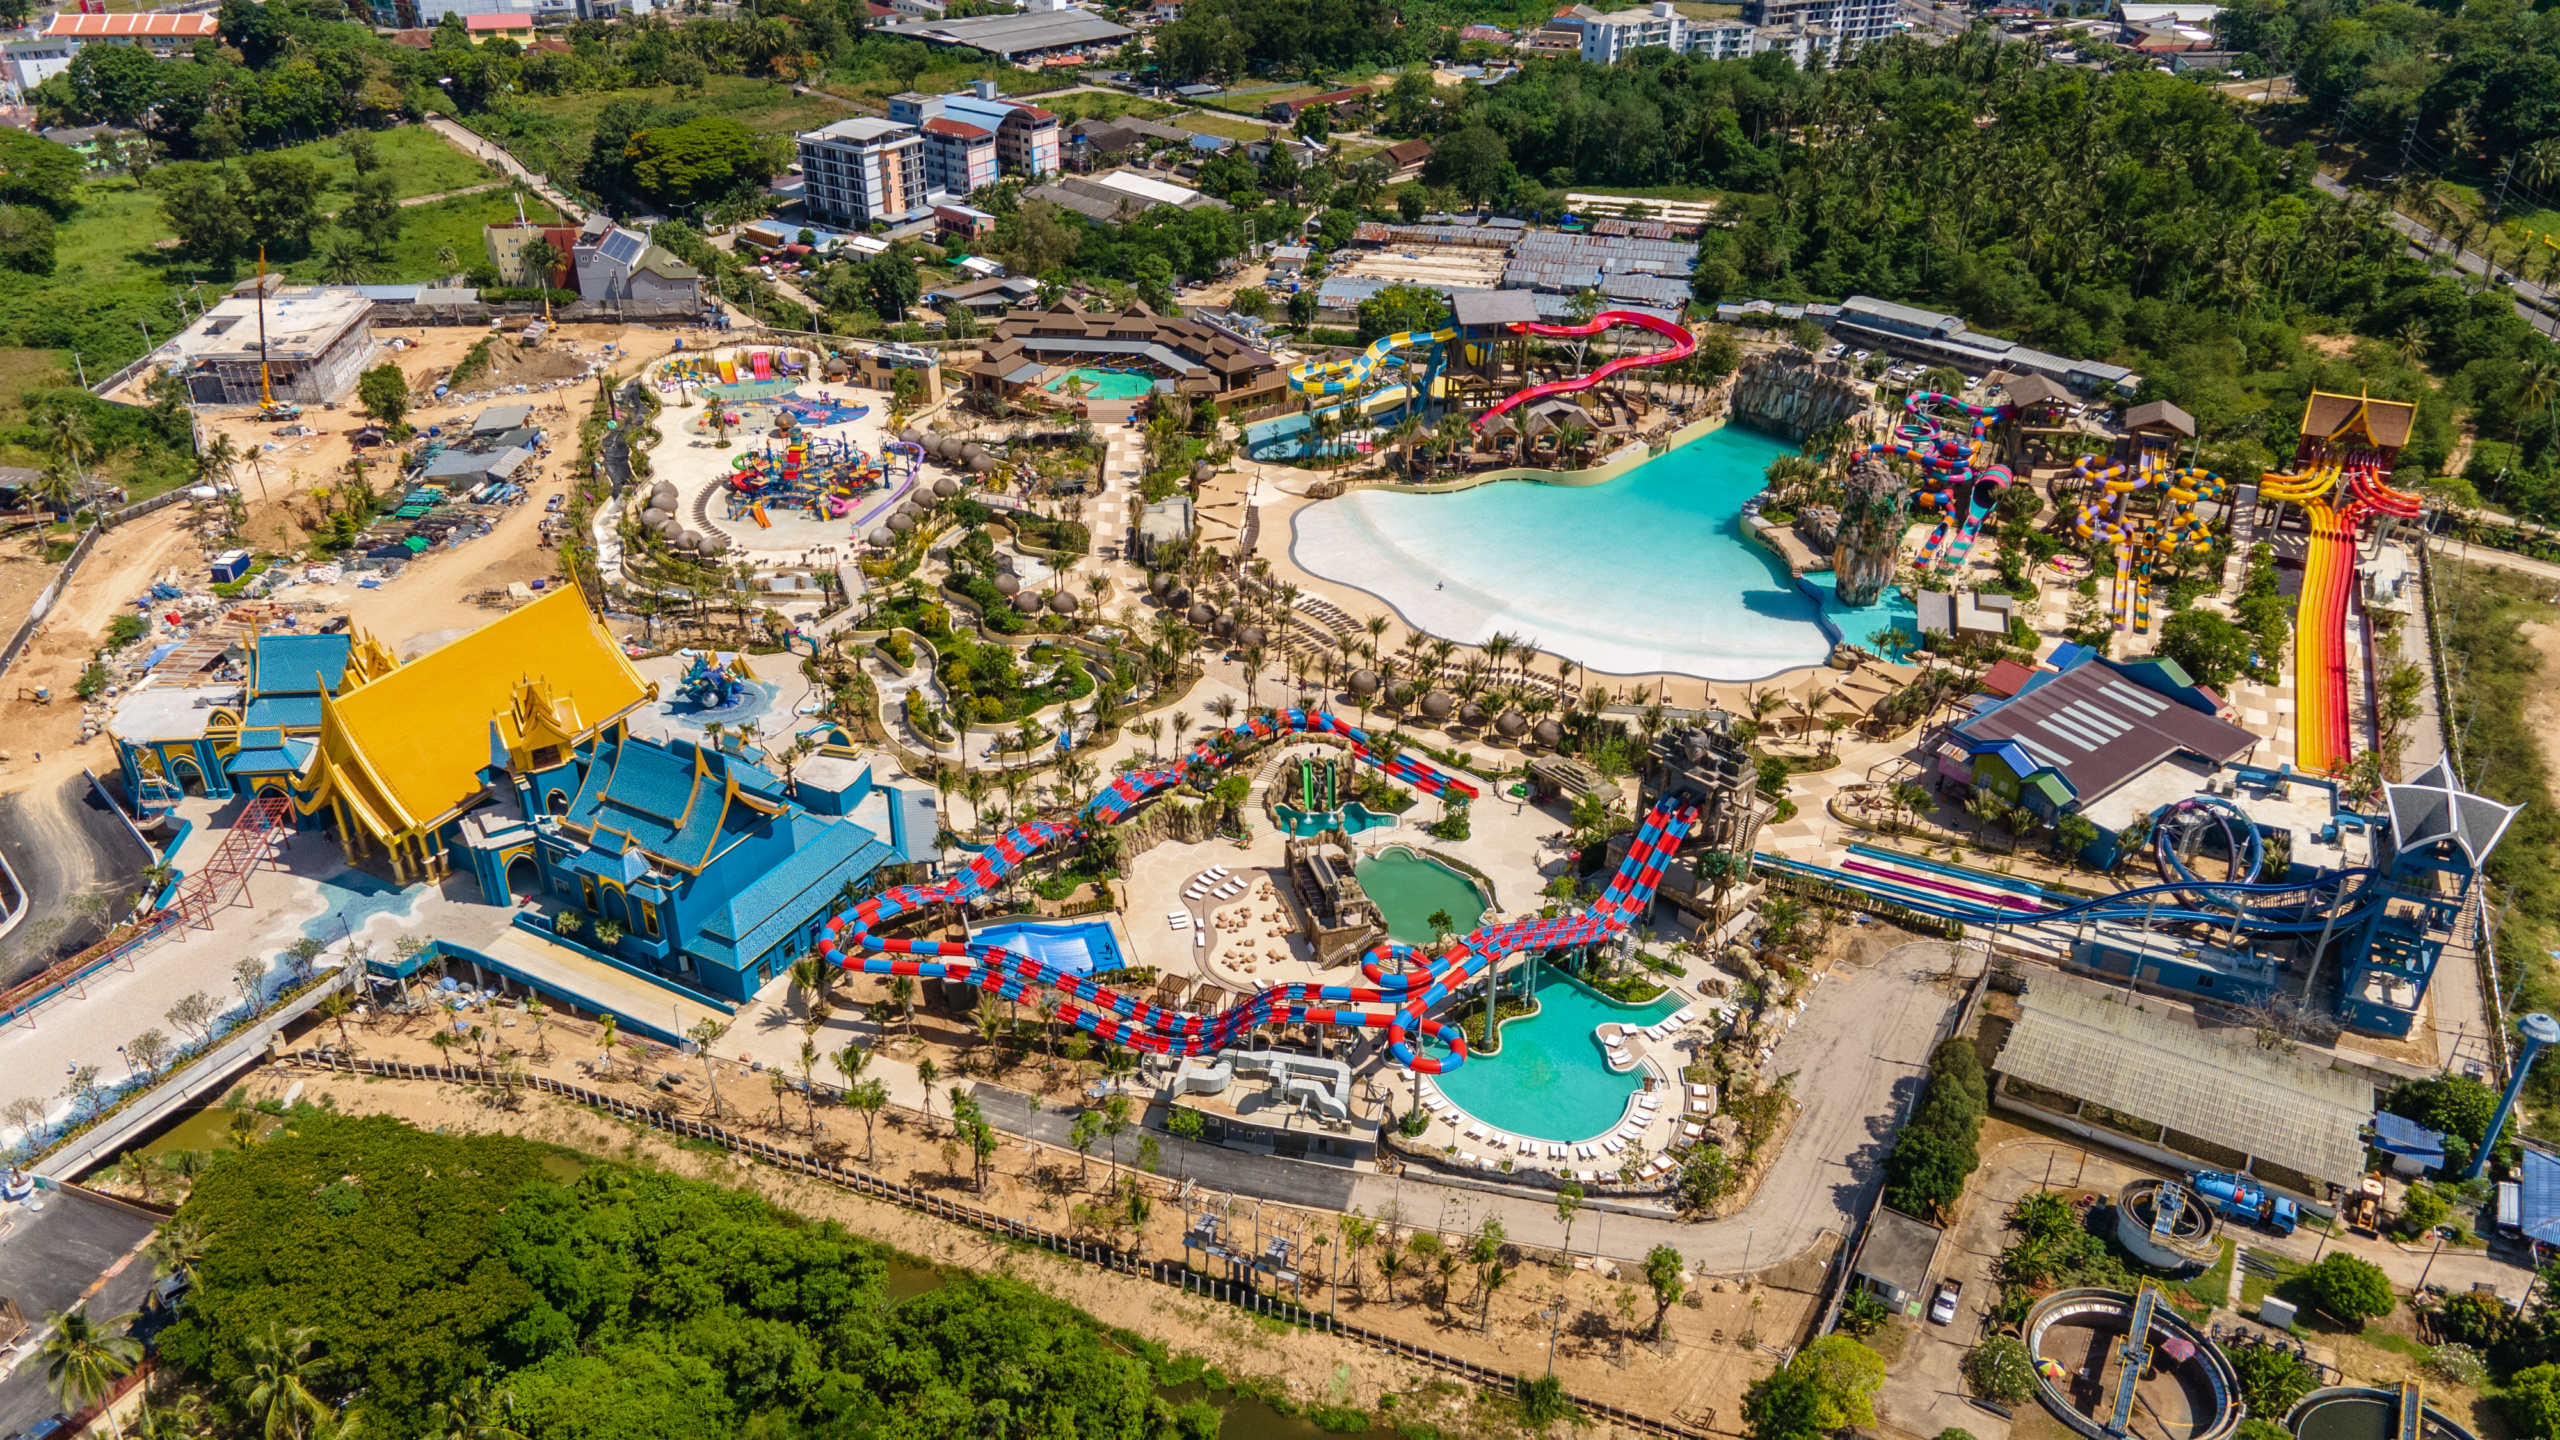 Bird's eye view of water park with water slides and wave pool